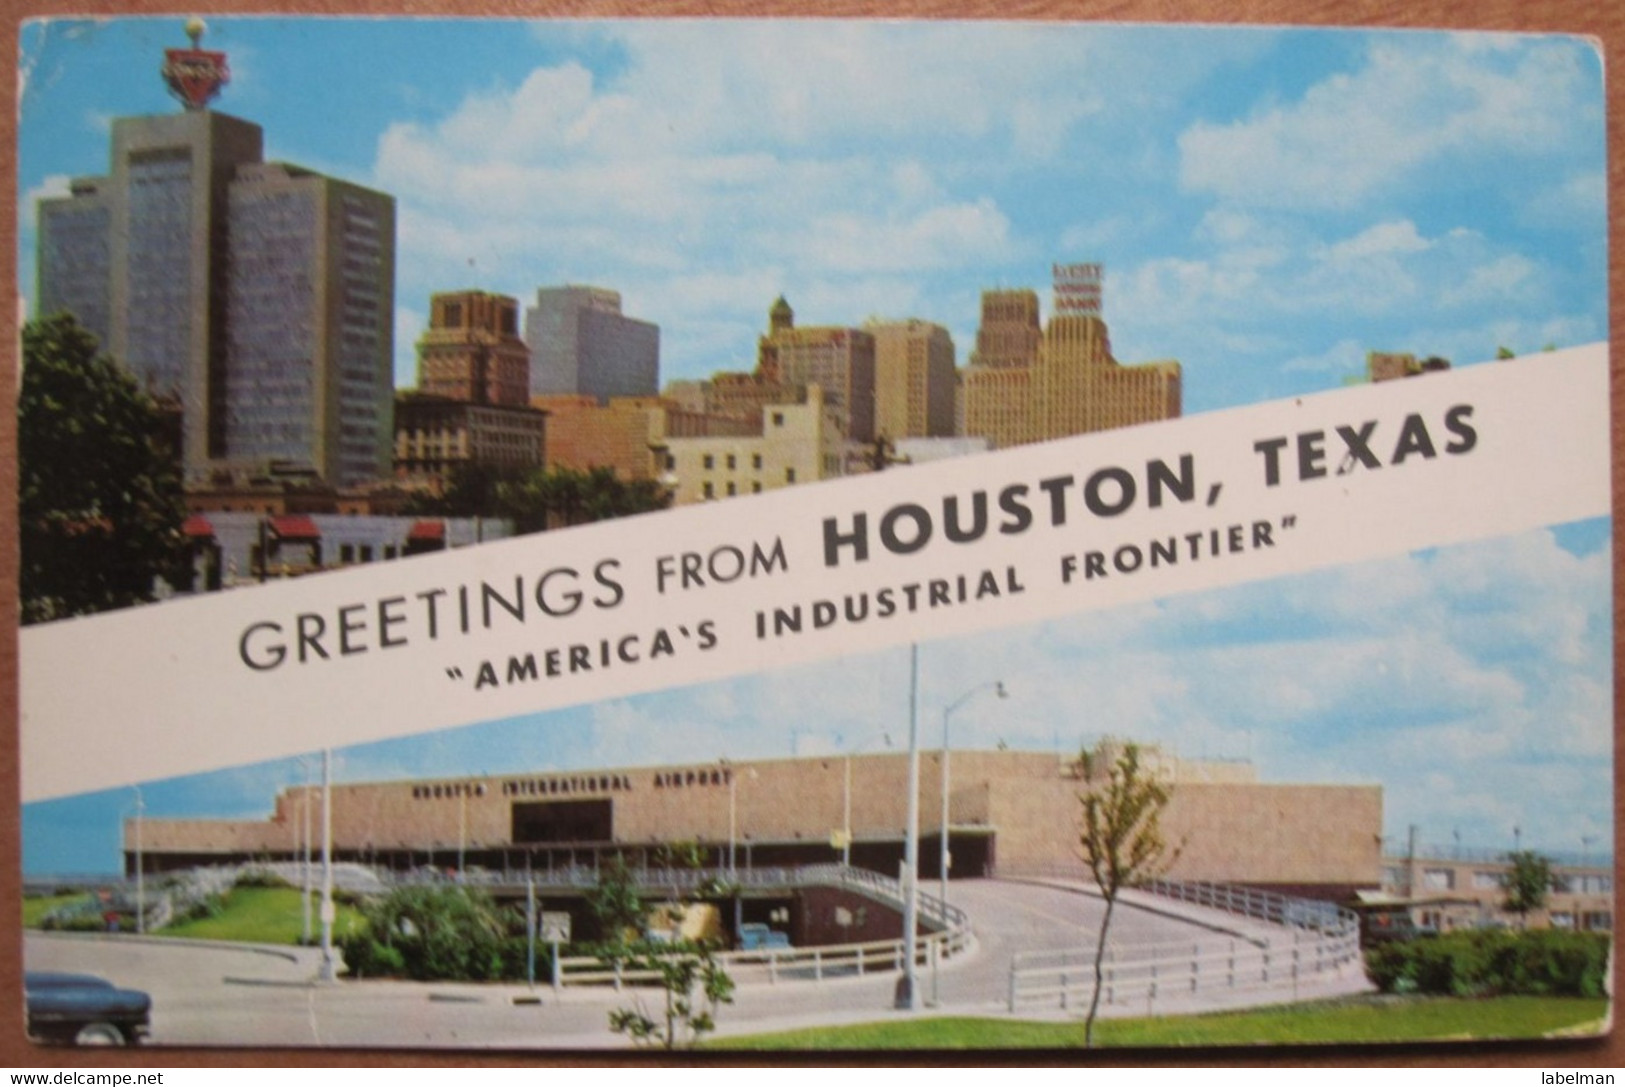 HOUSTON TEXAS INDUSTRY FRONTIER AIRPORT BUILDING USA UNITED STATES CARD ANSICHTSKARTE CARTOLINA POSTCARD PC STAMP - Austin